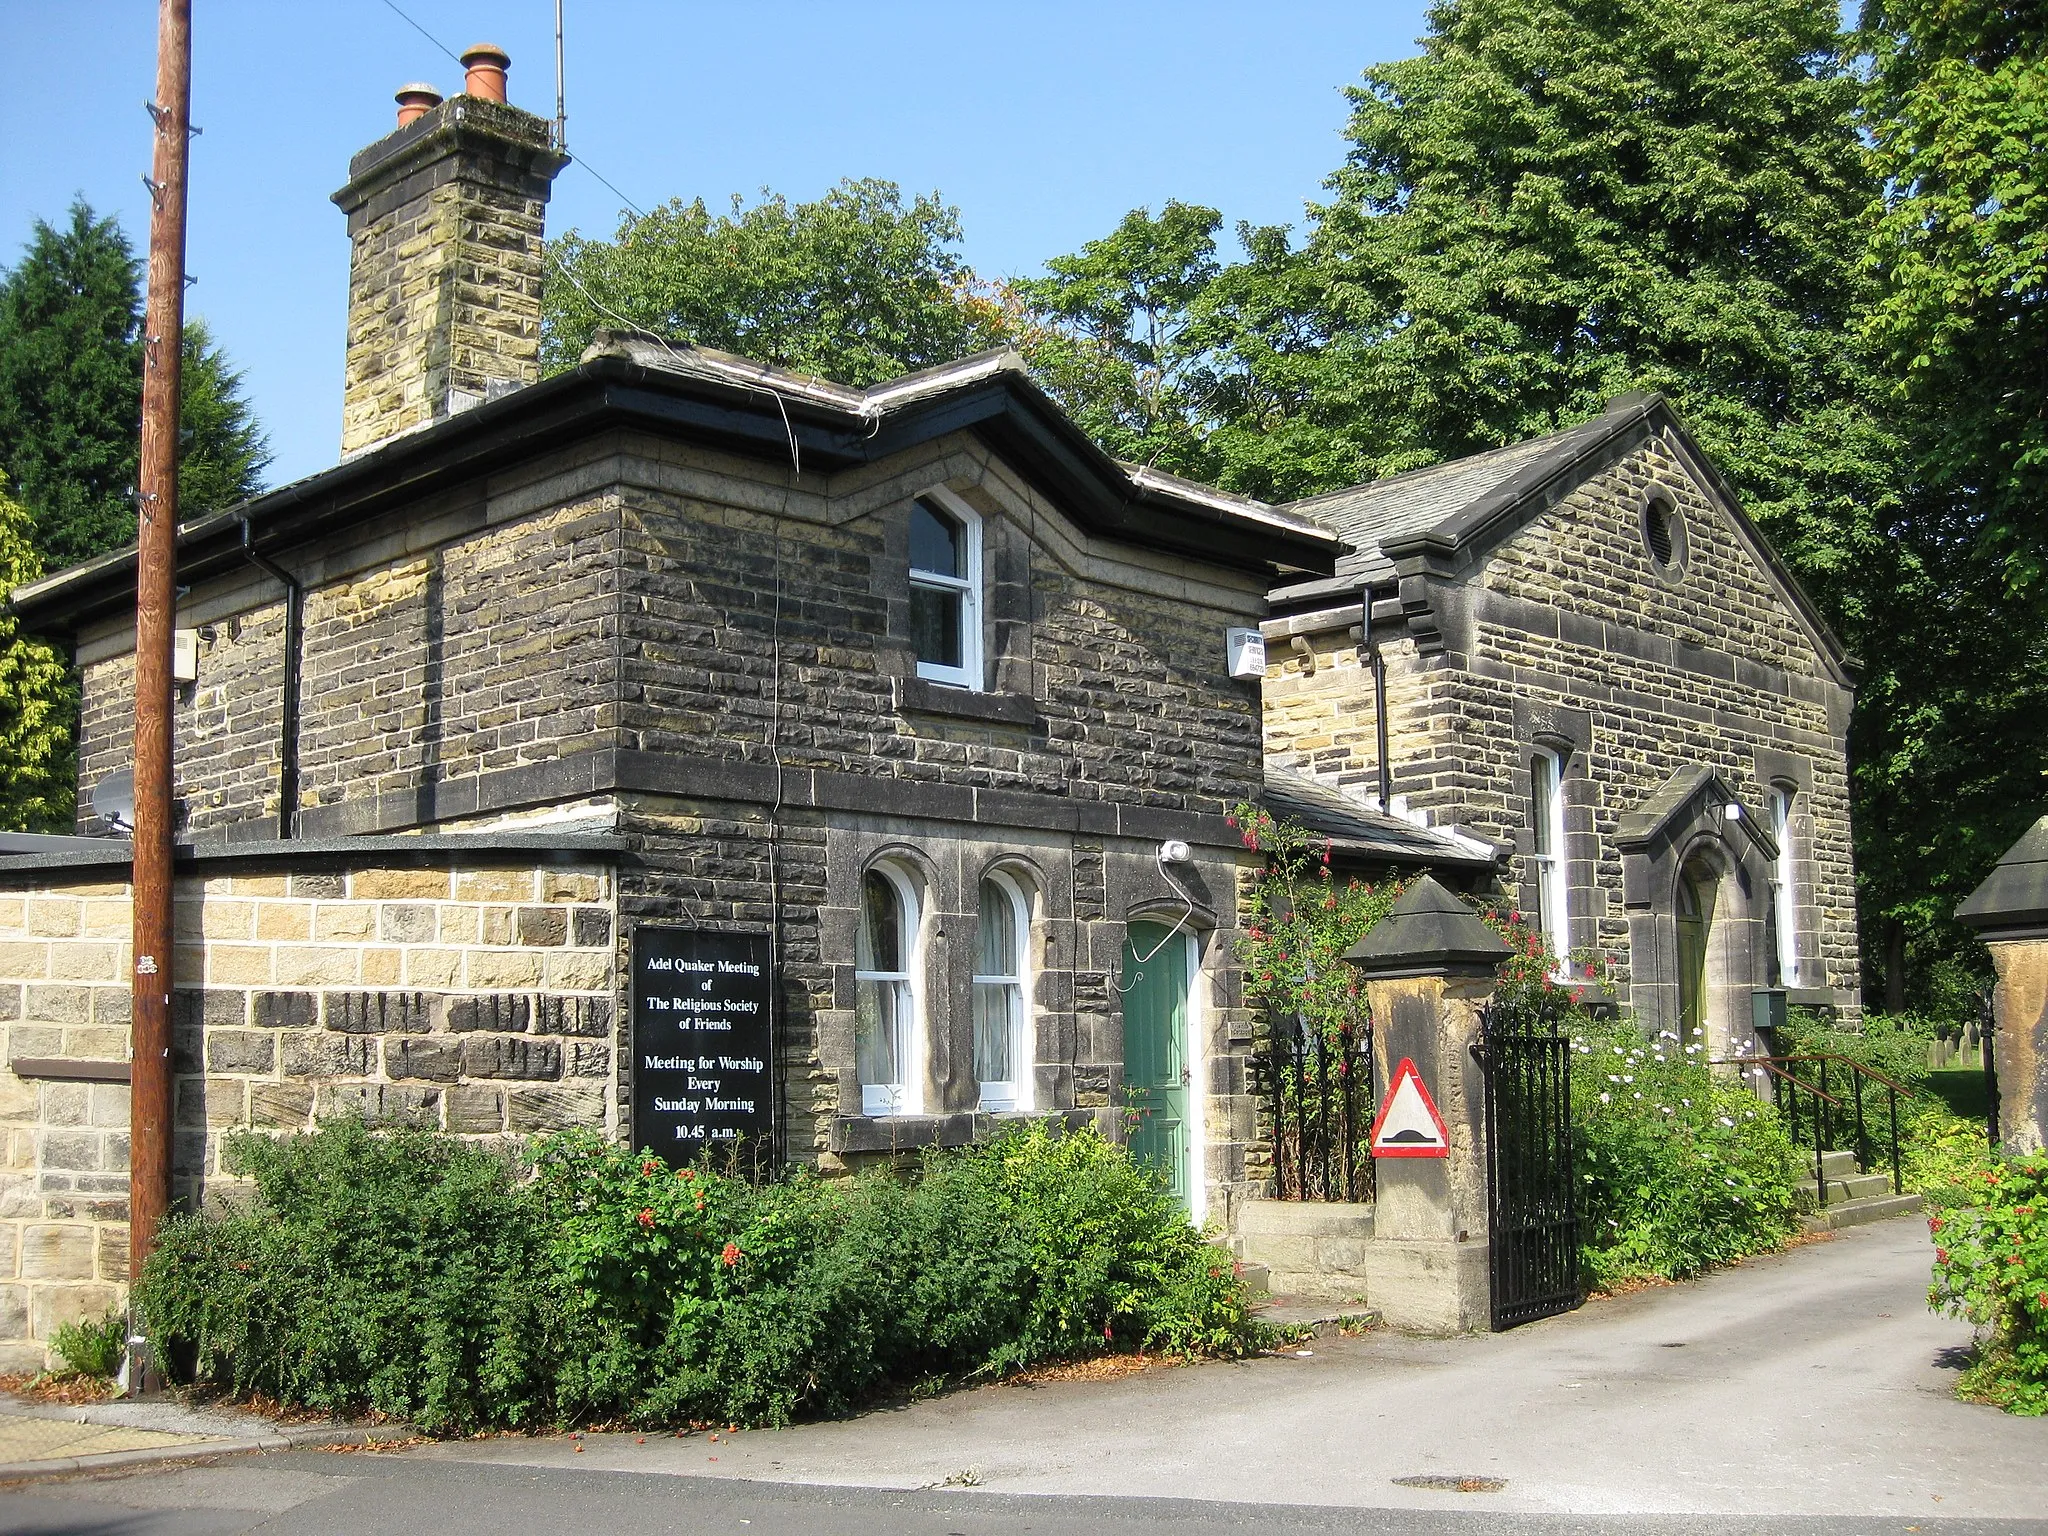 Photo showing: Adel Friends' Meeting House (right) and lodge (left), New Adel Lane, Leeds, West Yorkshire, seen from the southeast. Built in 1868.